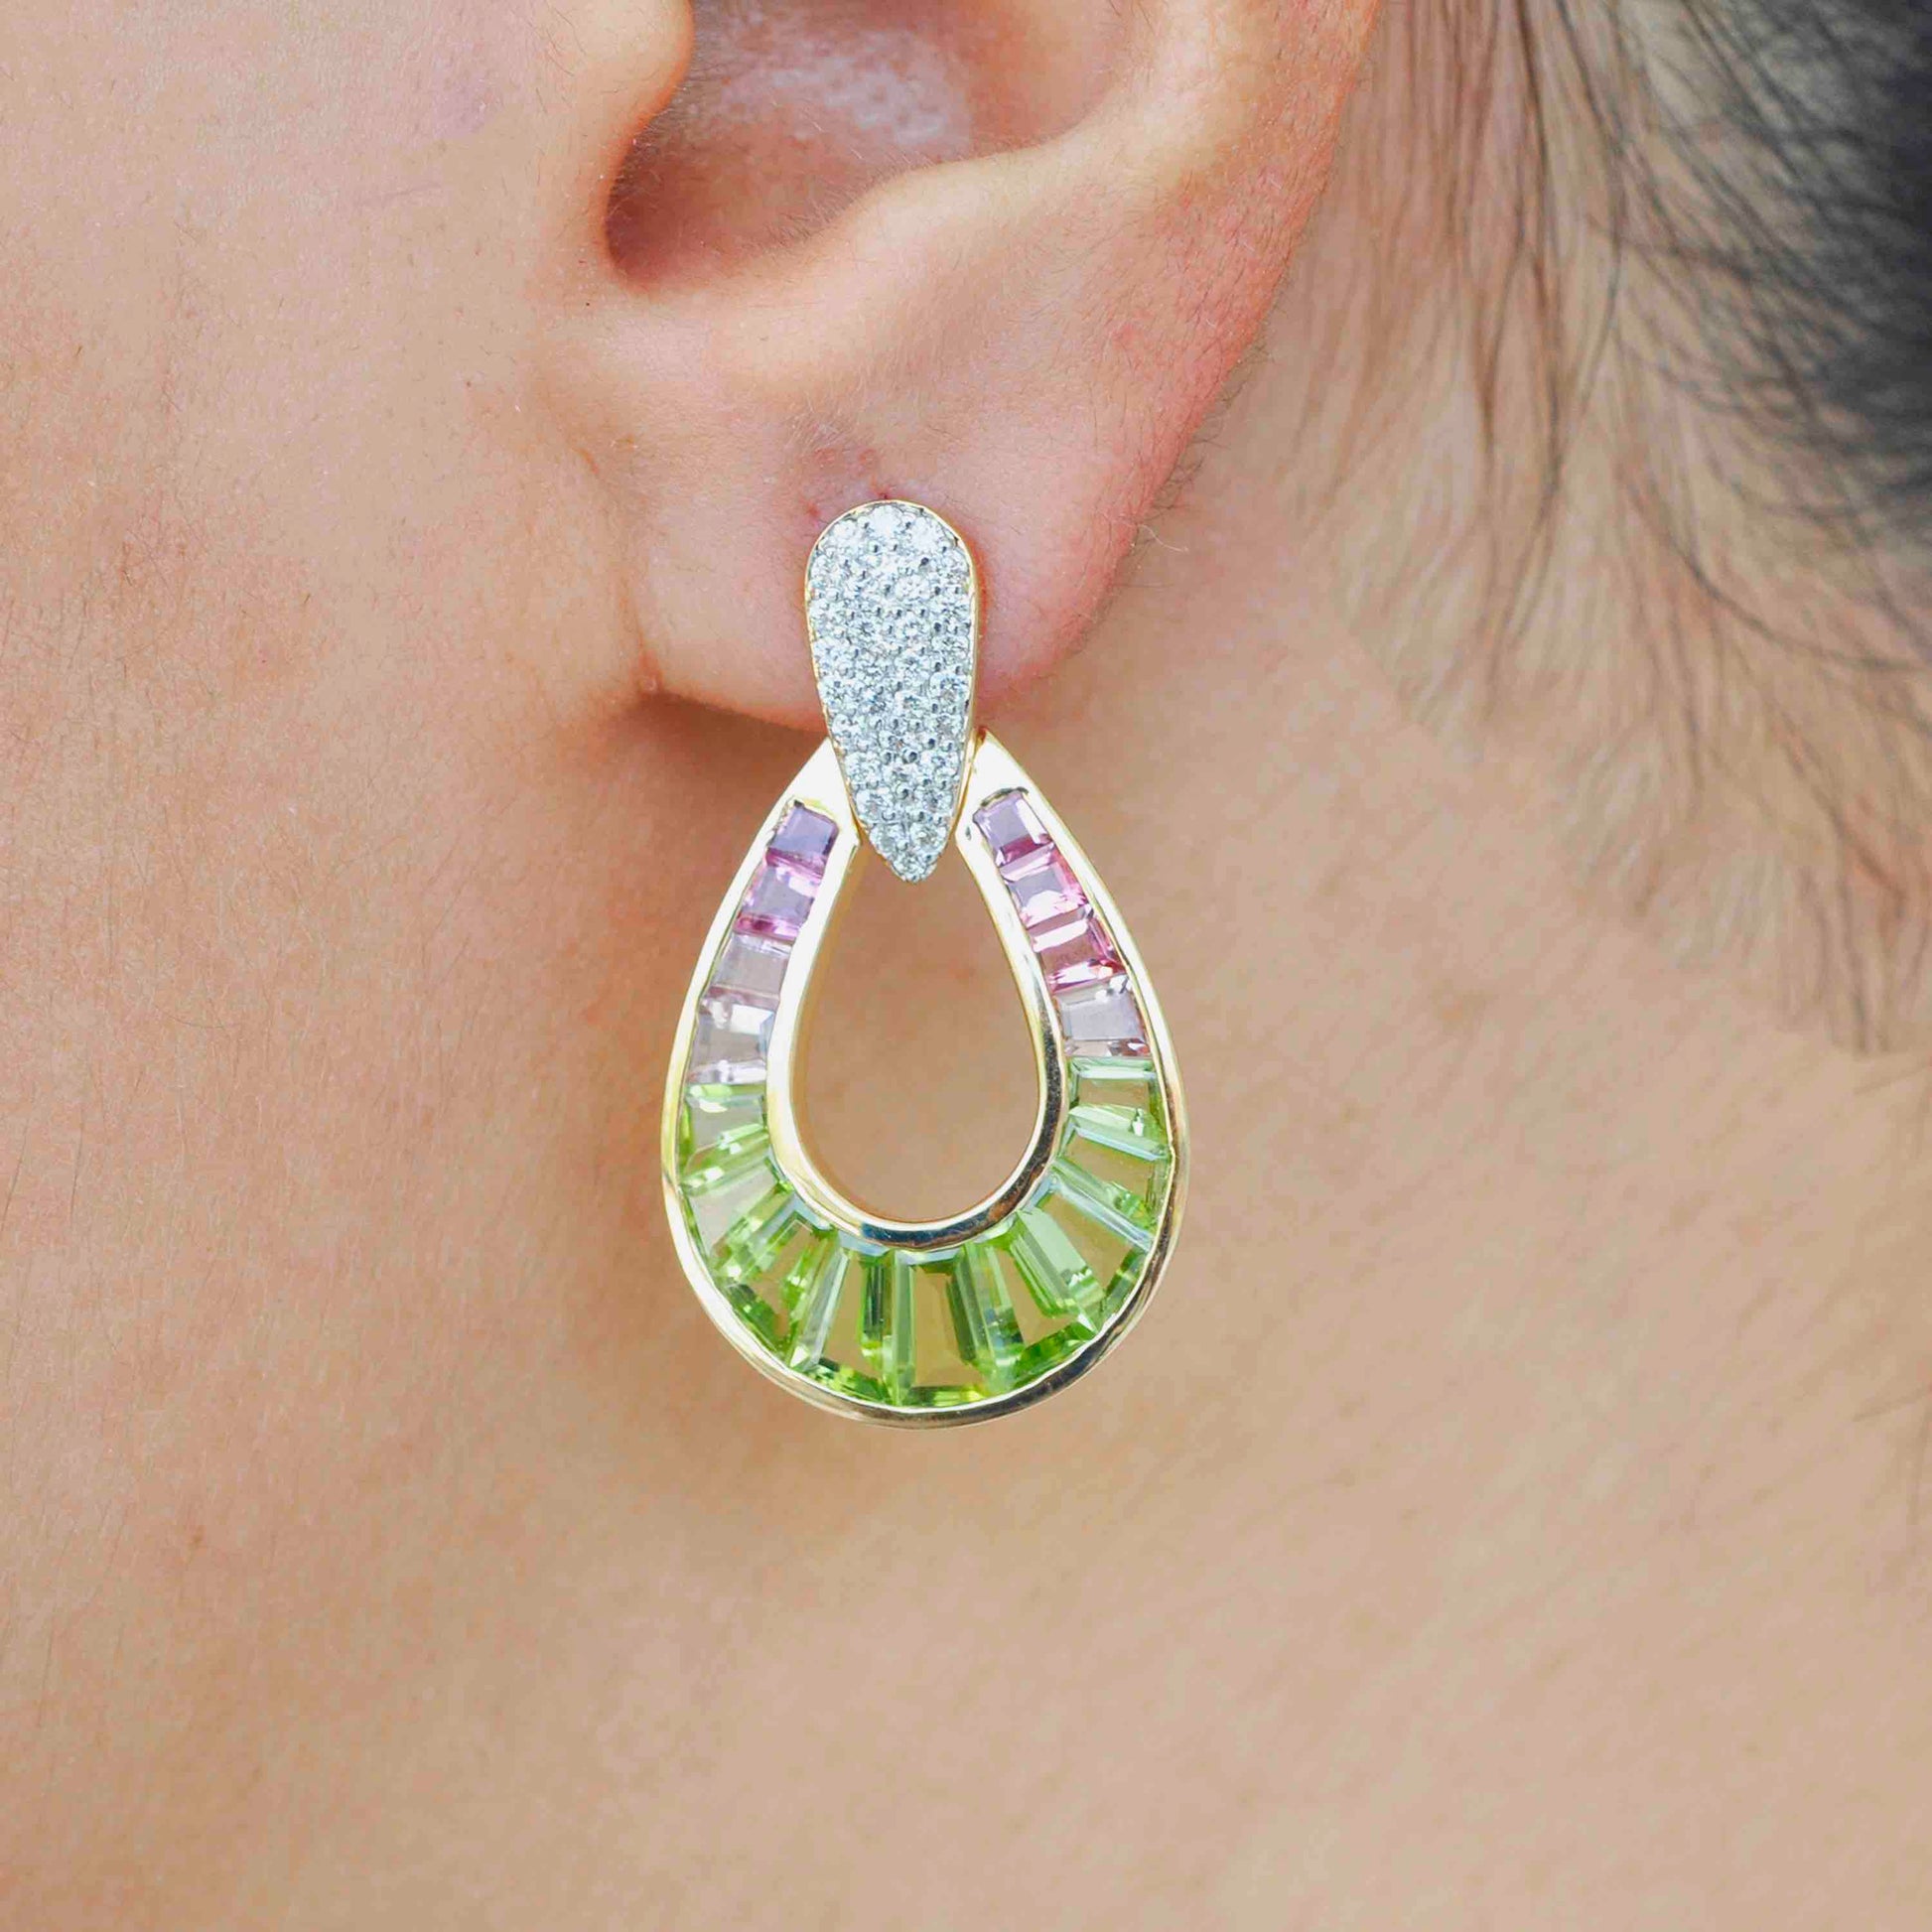 Handcrafted dangle earrings adorned with pink tourmaline, peridot, and diamonds.